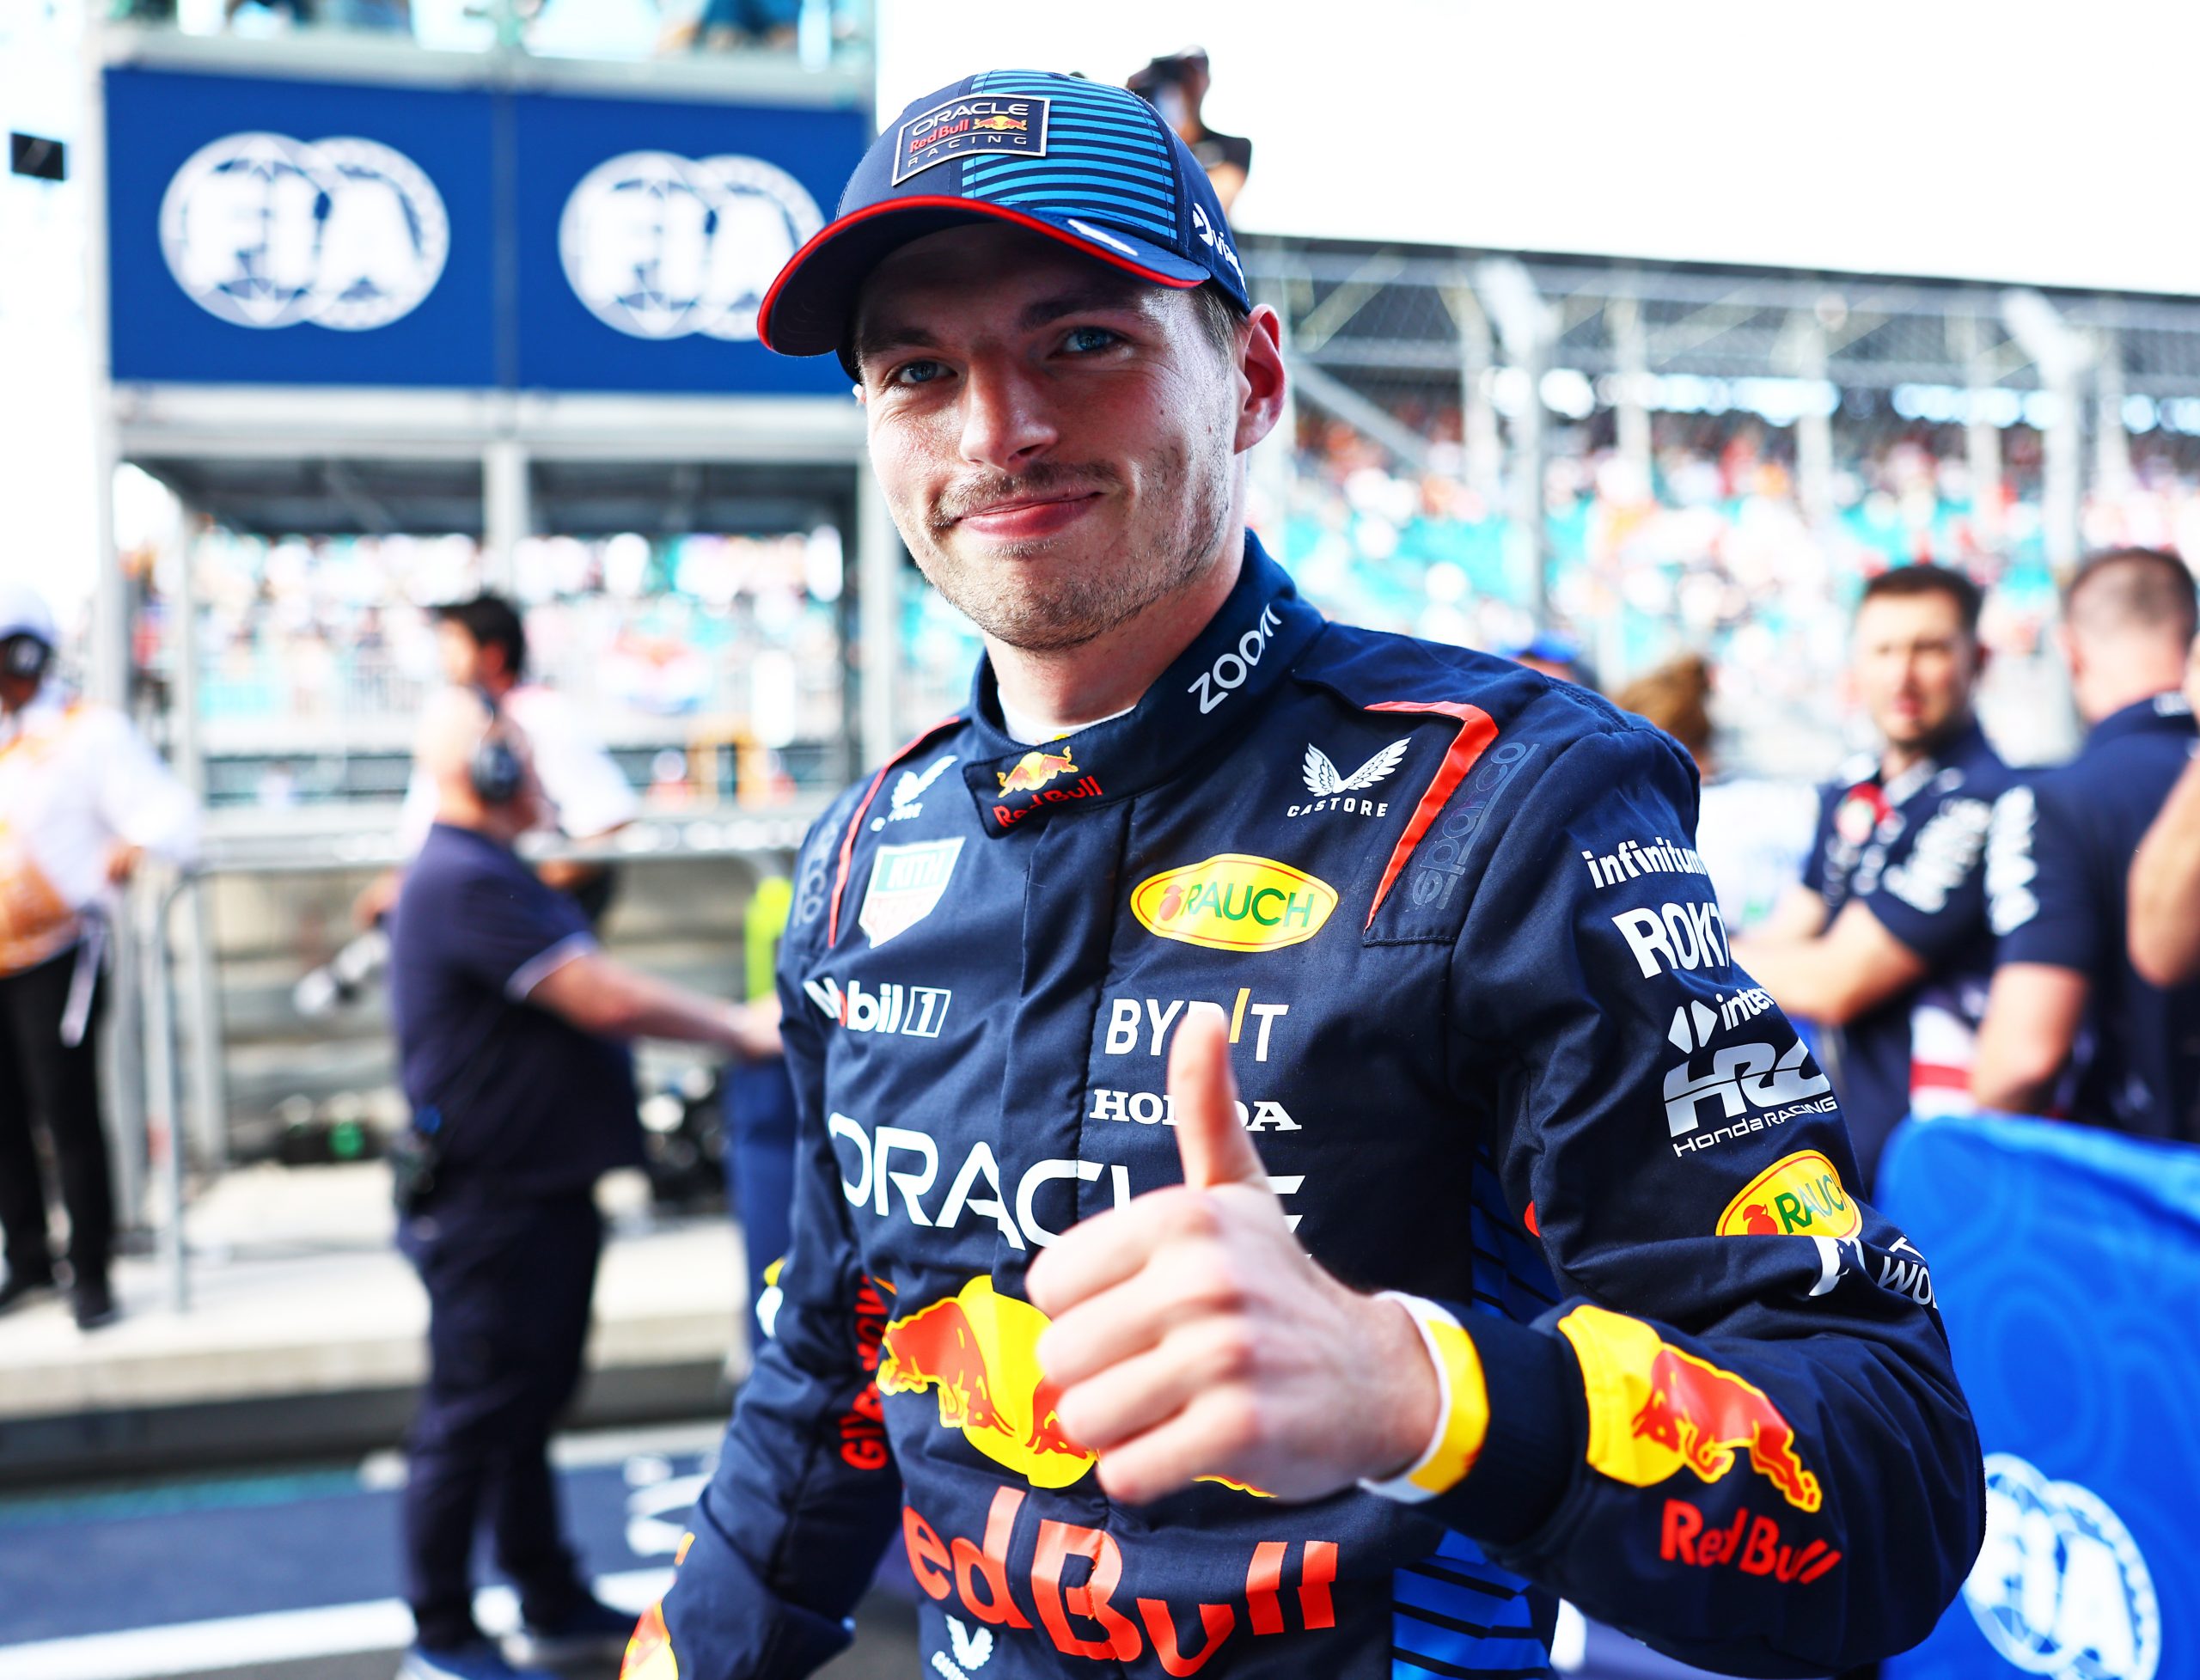 Sprint Pole qualifier Max Verstappen of the Netherlands and Oracle Red Bull Racing celebrates in parc ferme during Sprint Qualifying ahead of the F1 Grand Prix of Miami at Miami International Autodrome on May 03, 2024 in Miami, Florida. (Photo by Mark Thompson/Getty Images)